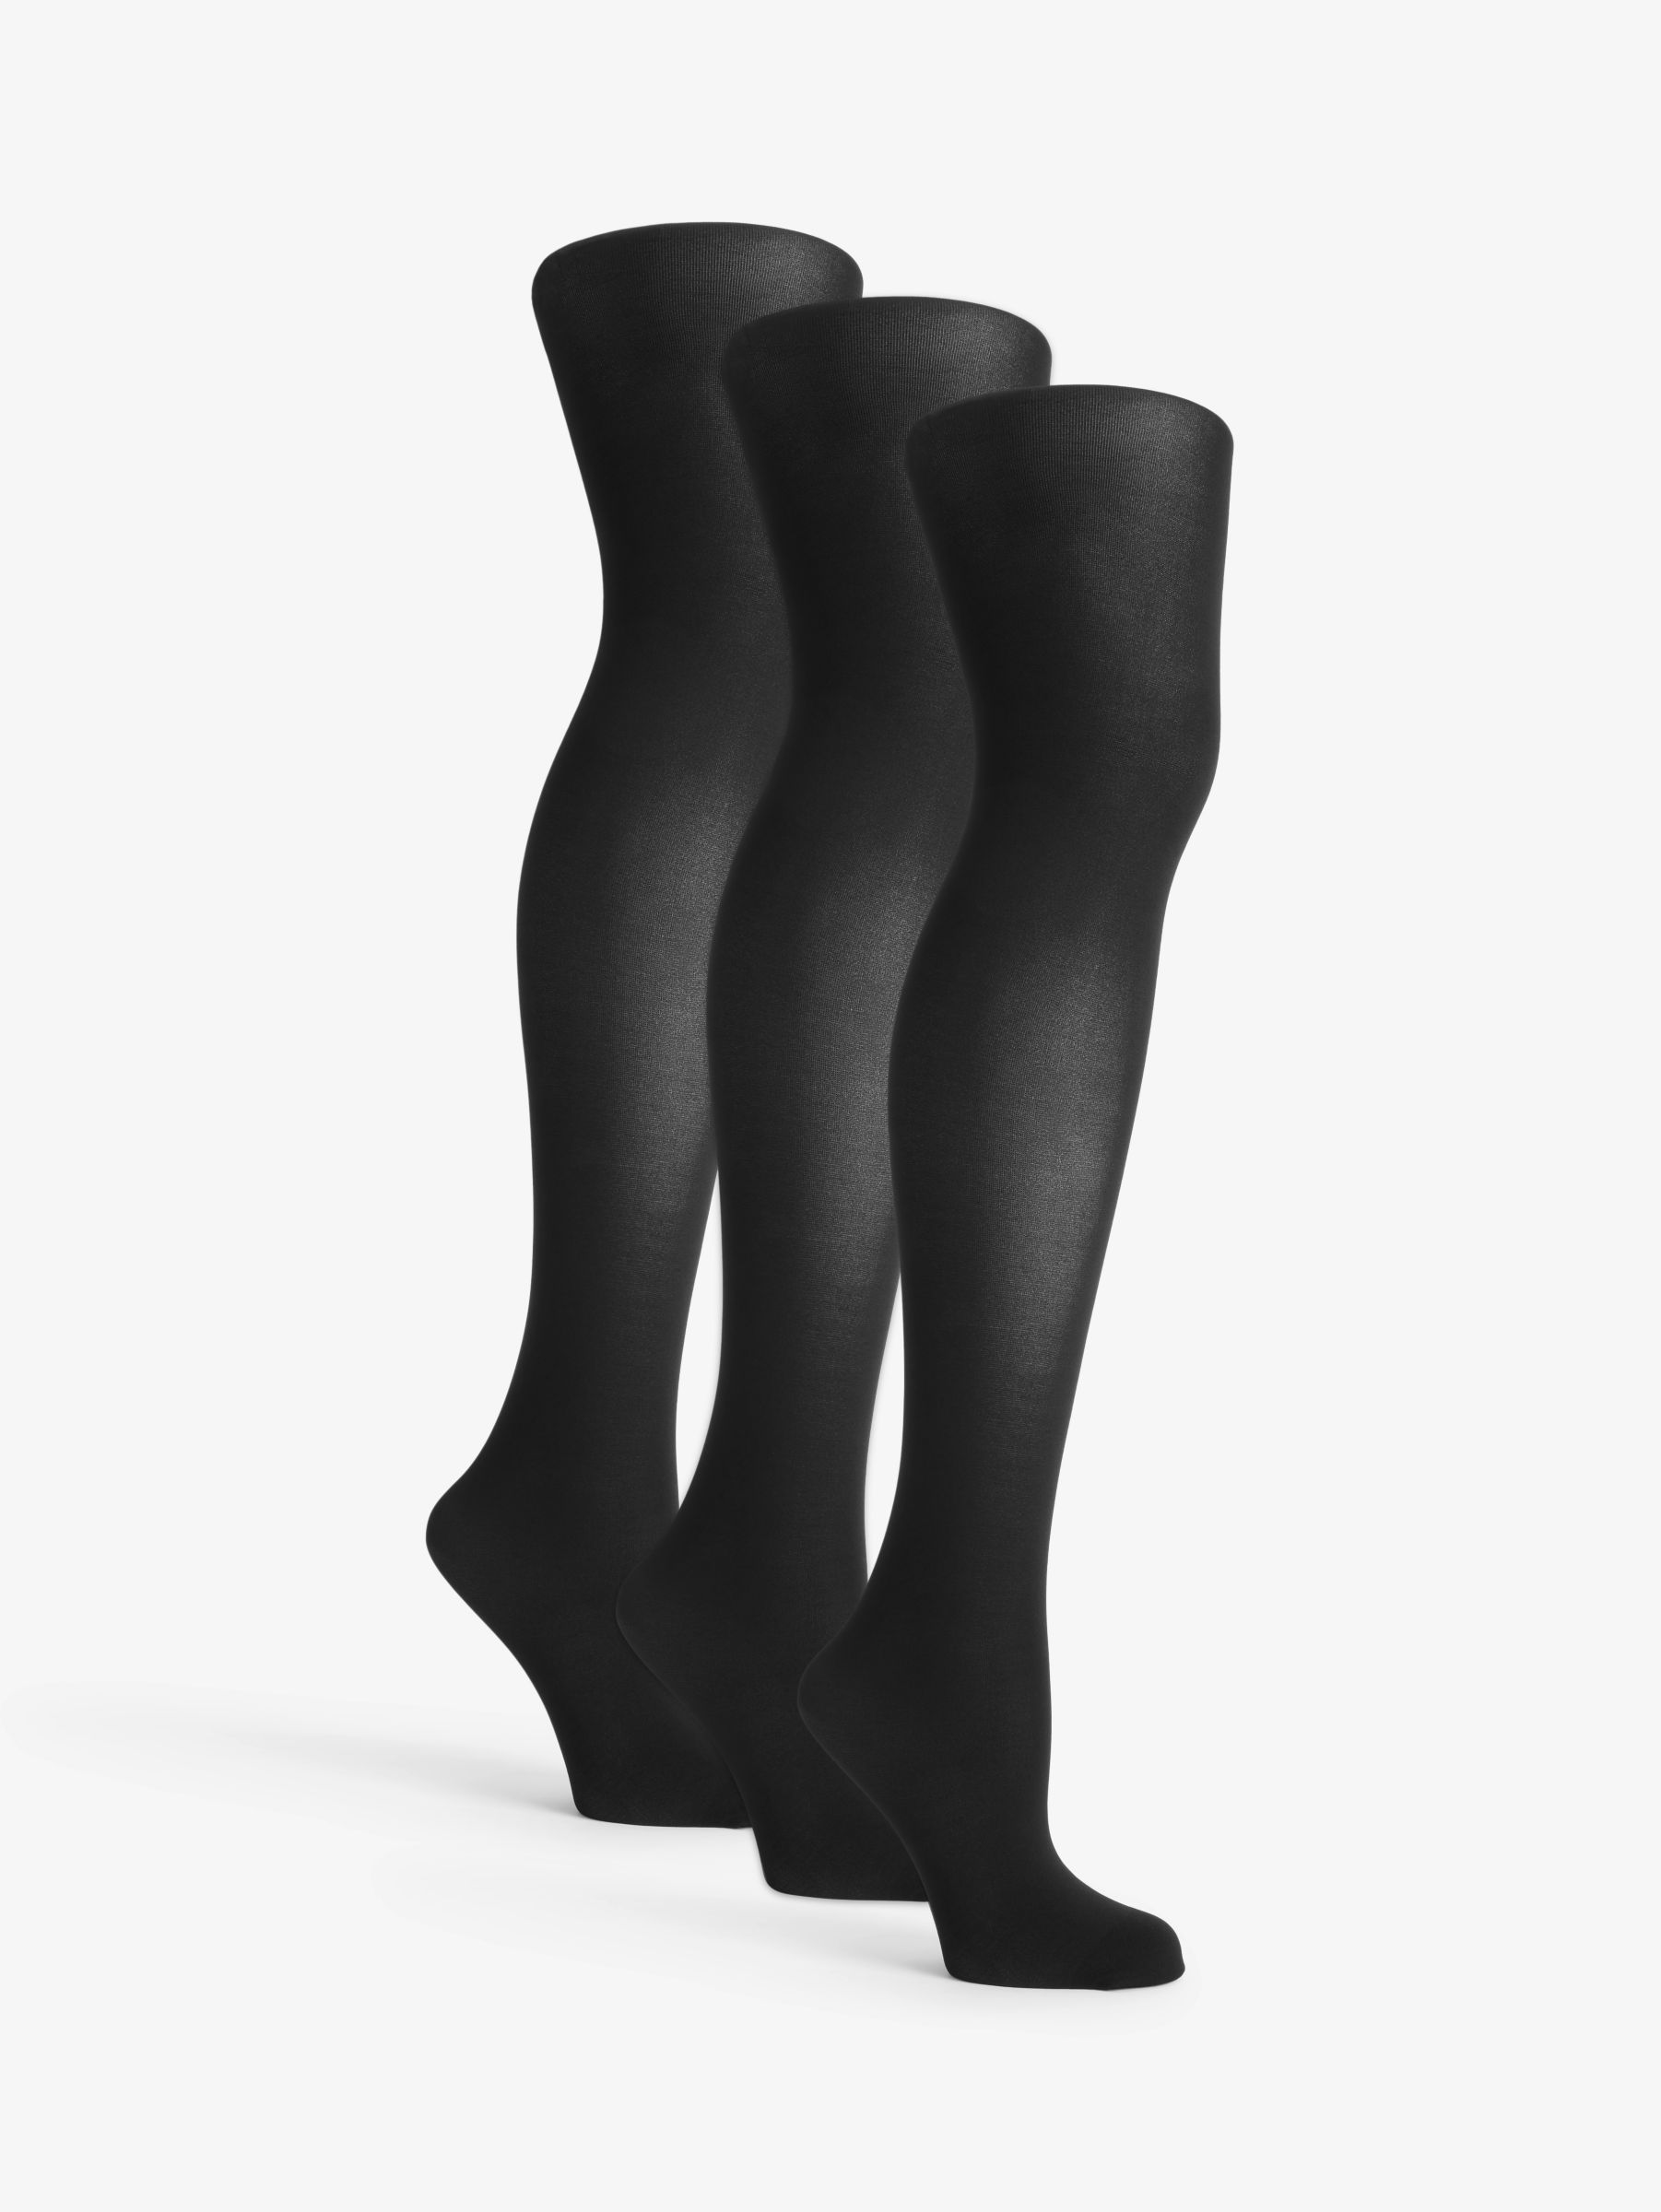 John Lewis ANYDAY 40 Denier Opaque Tights, Pack of 3, Black at John Lewis &  Partners